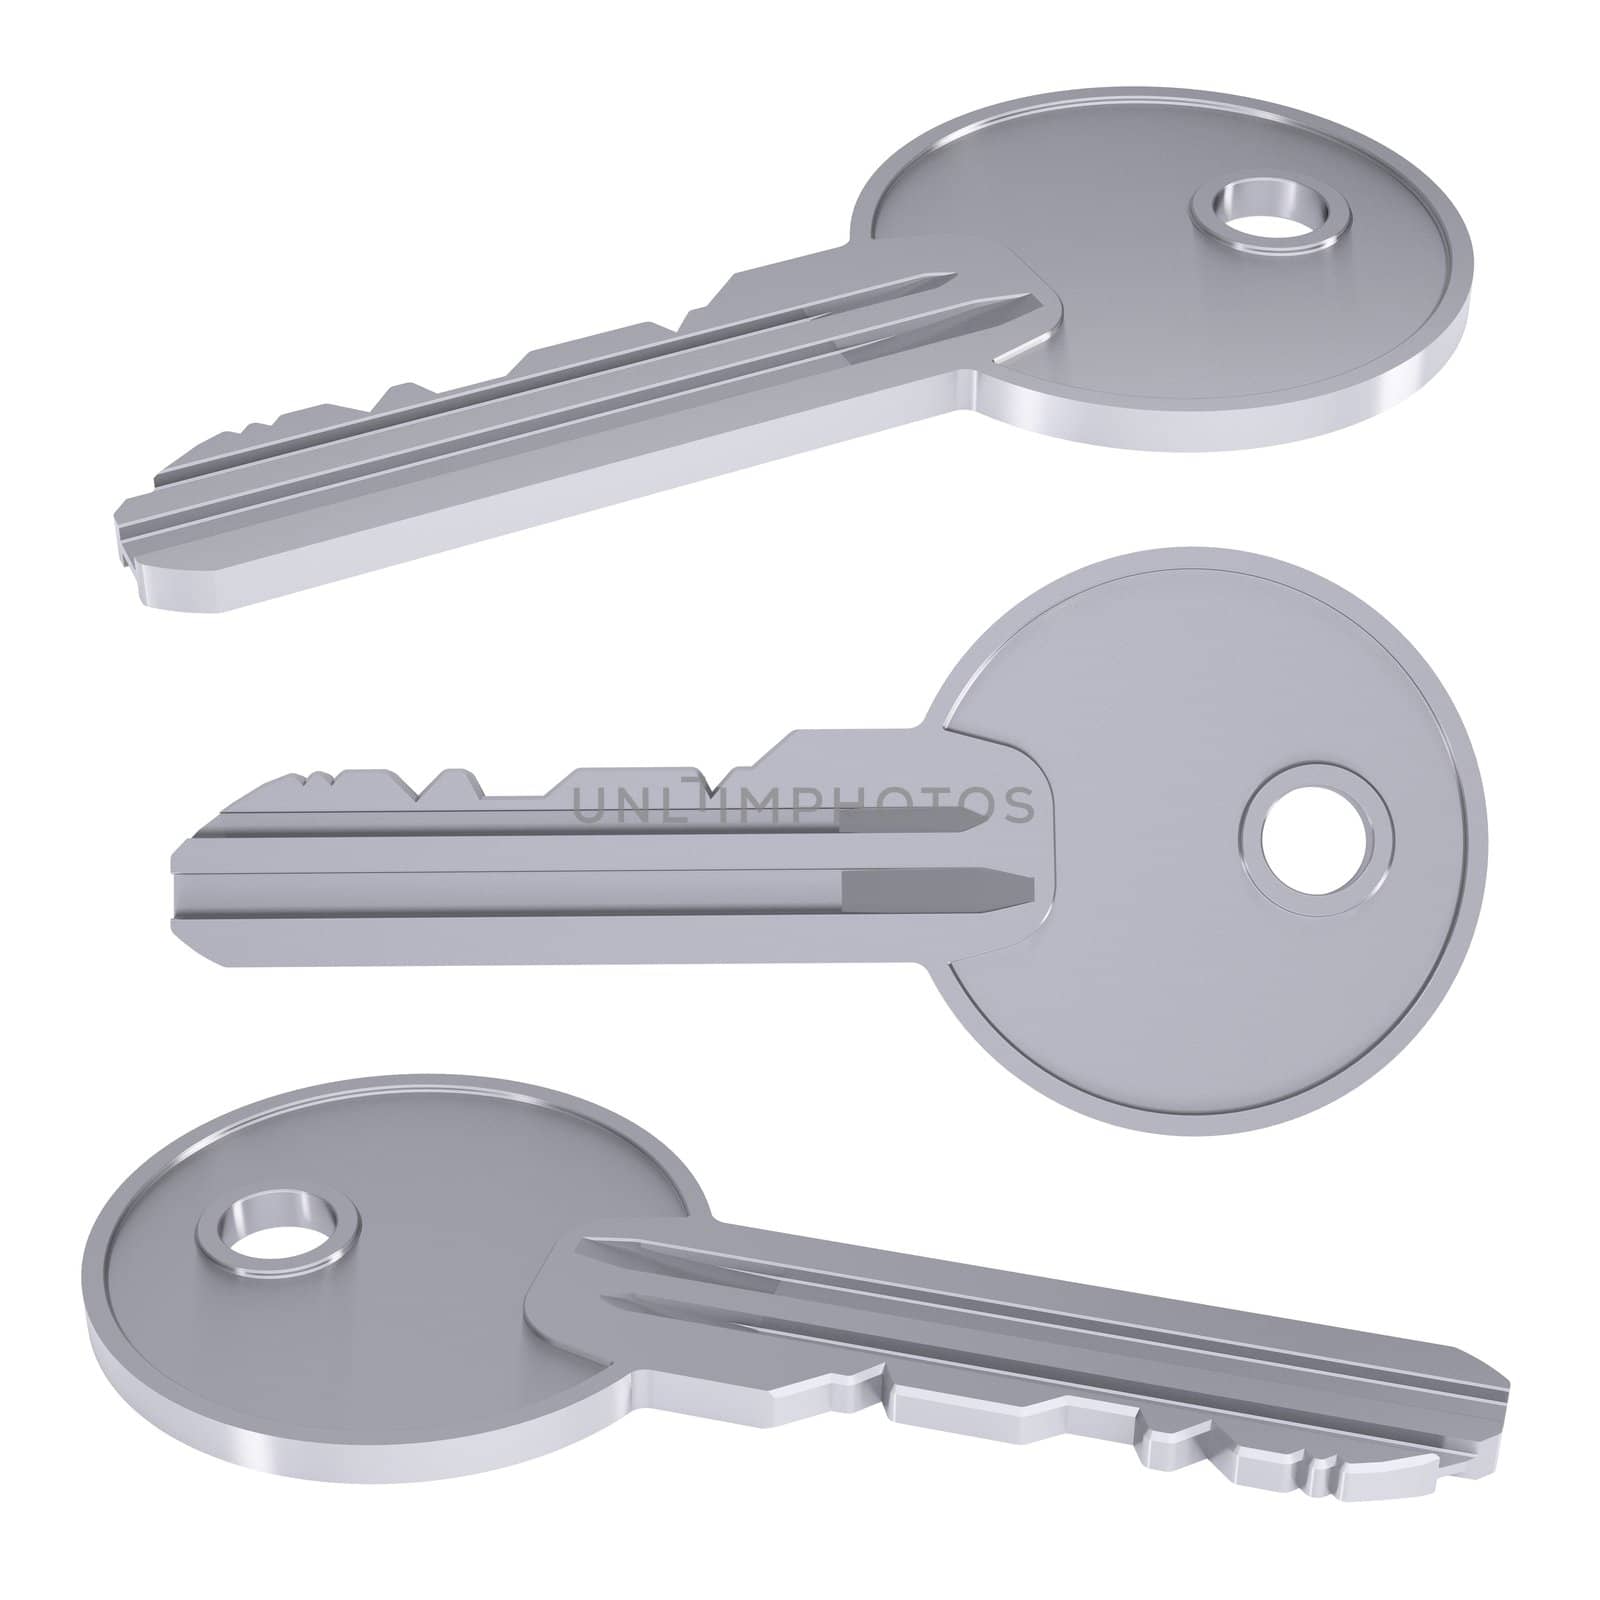 Metal key. Isolated render on a white background